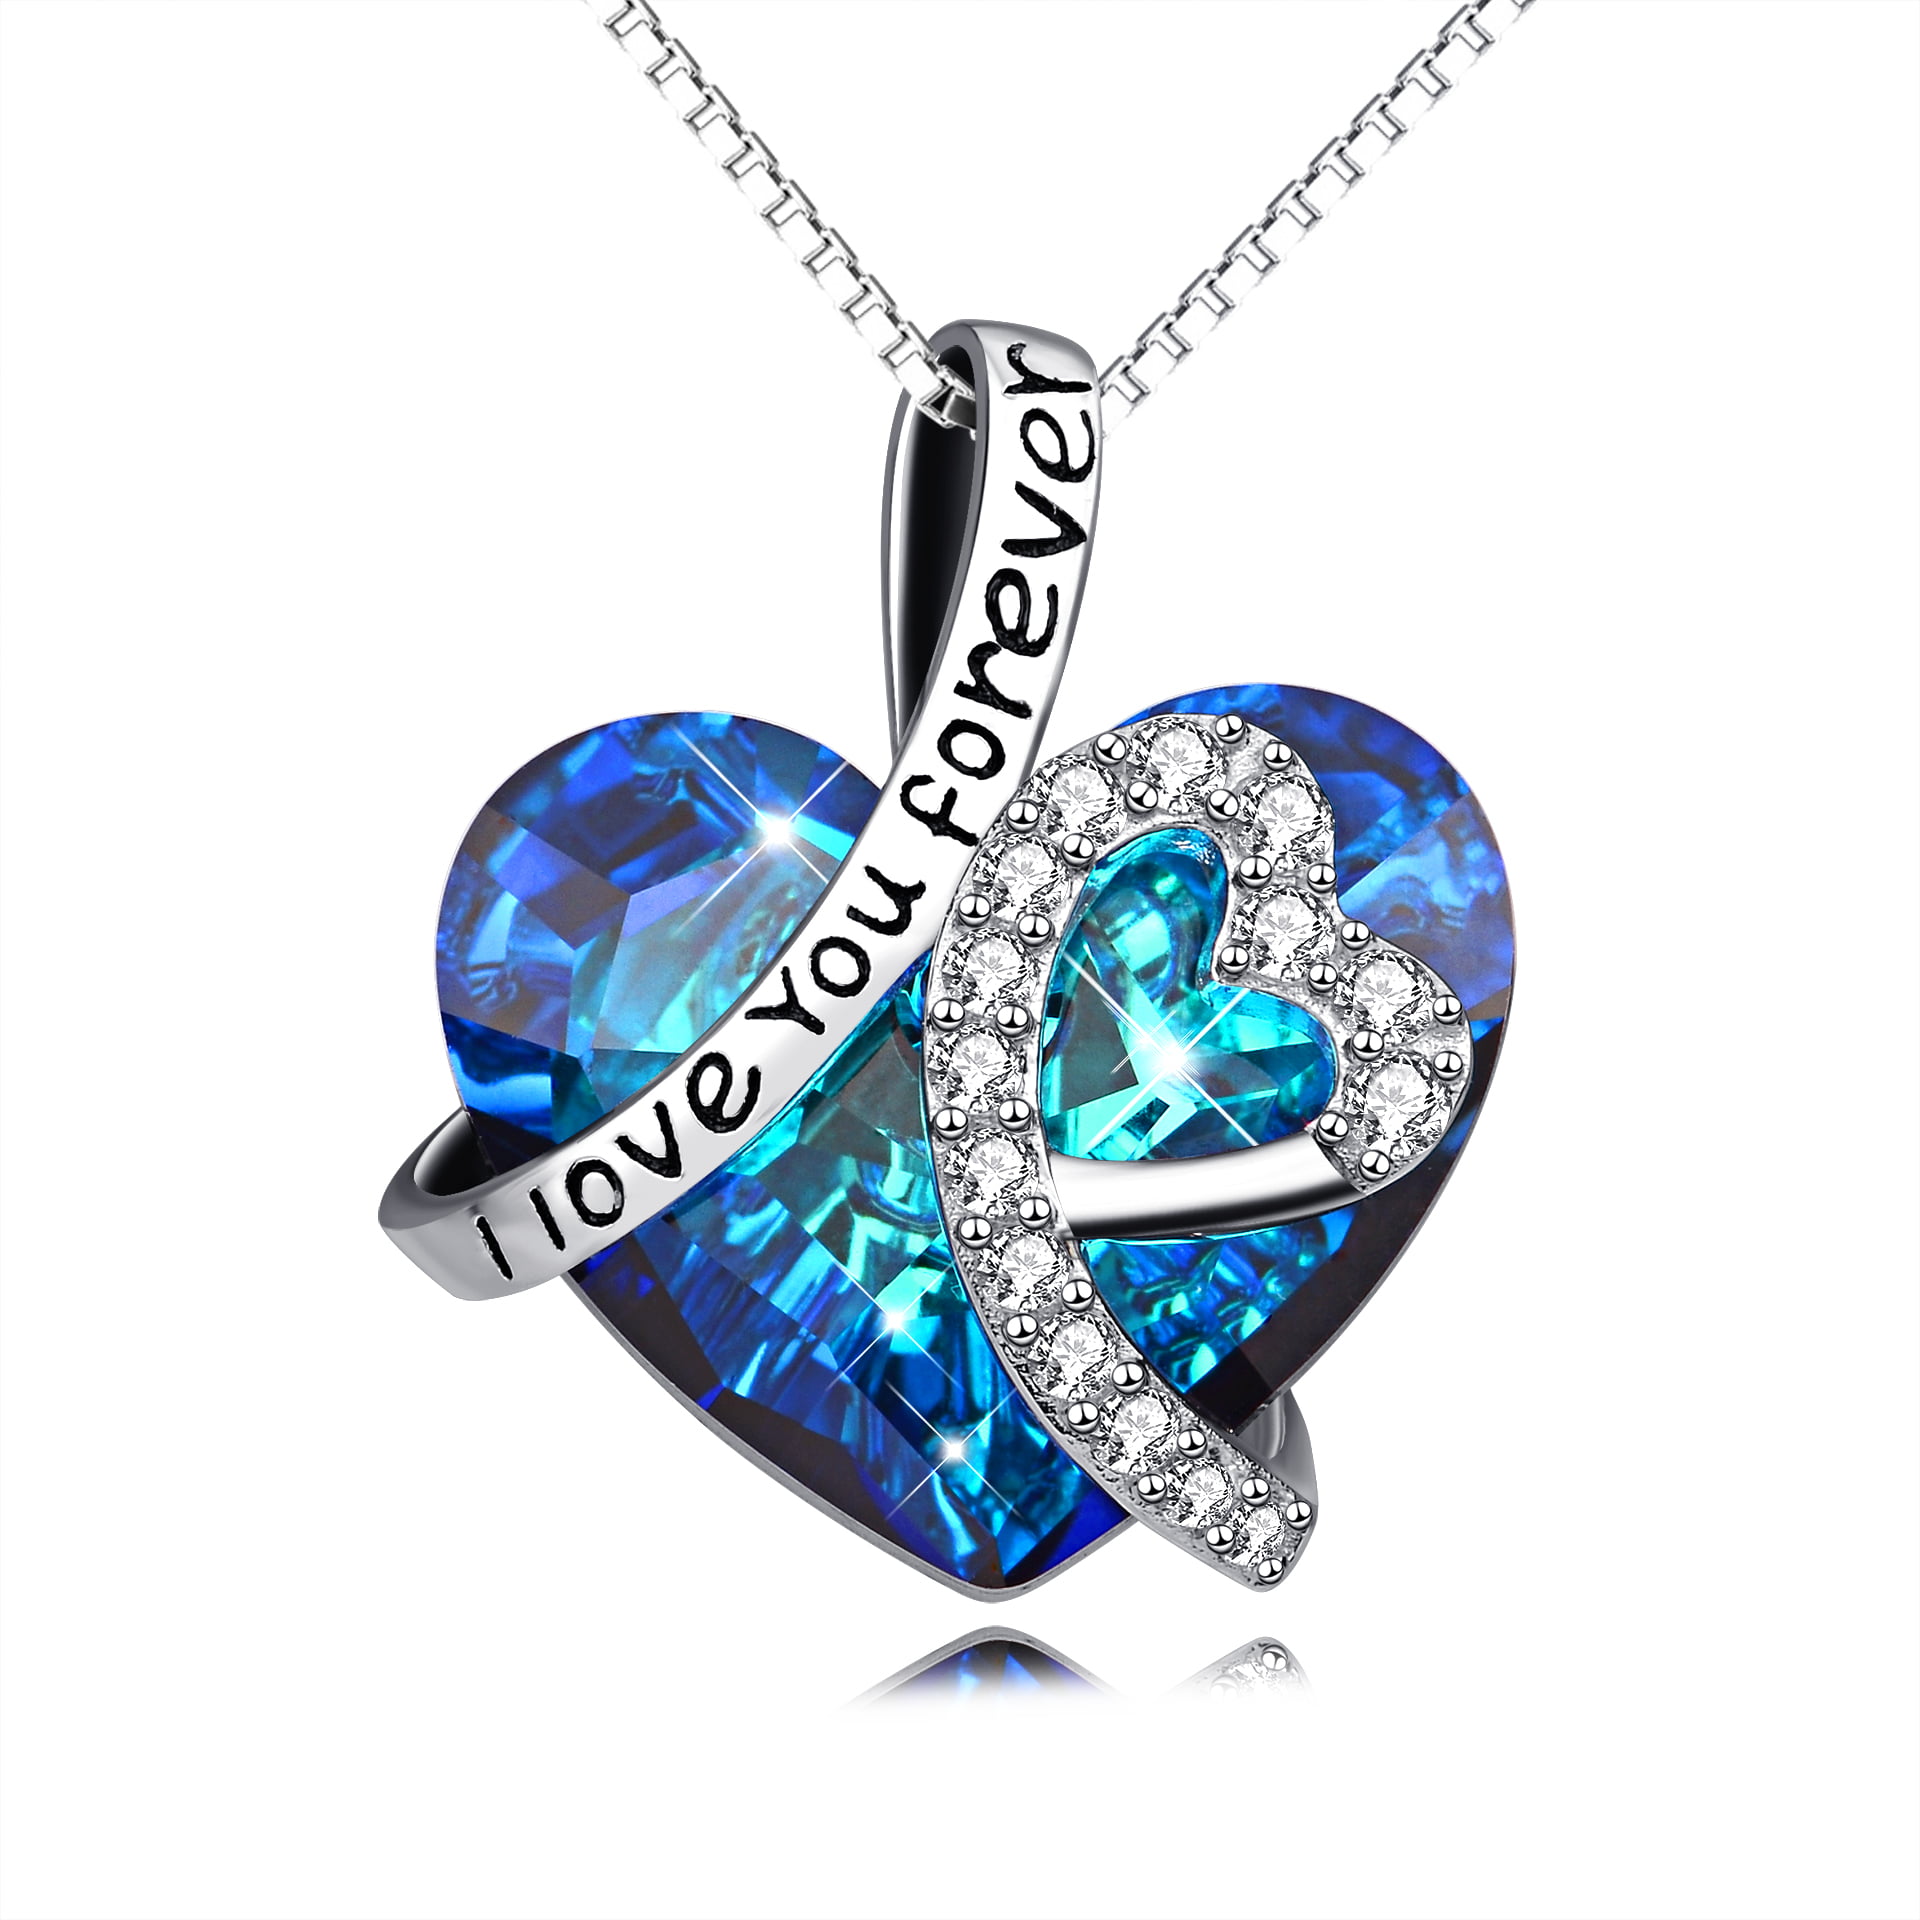 Gift for Wife Wife by My Side Forever Love Necklace-CZ Heart Pendant Stainless Steel or 18k Gold